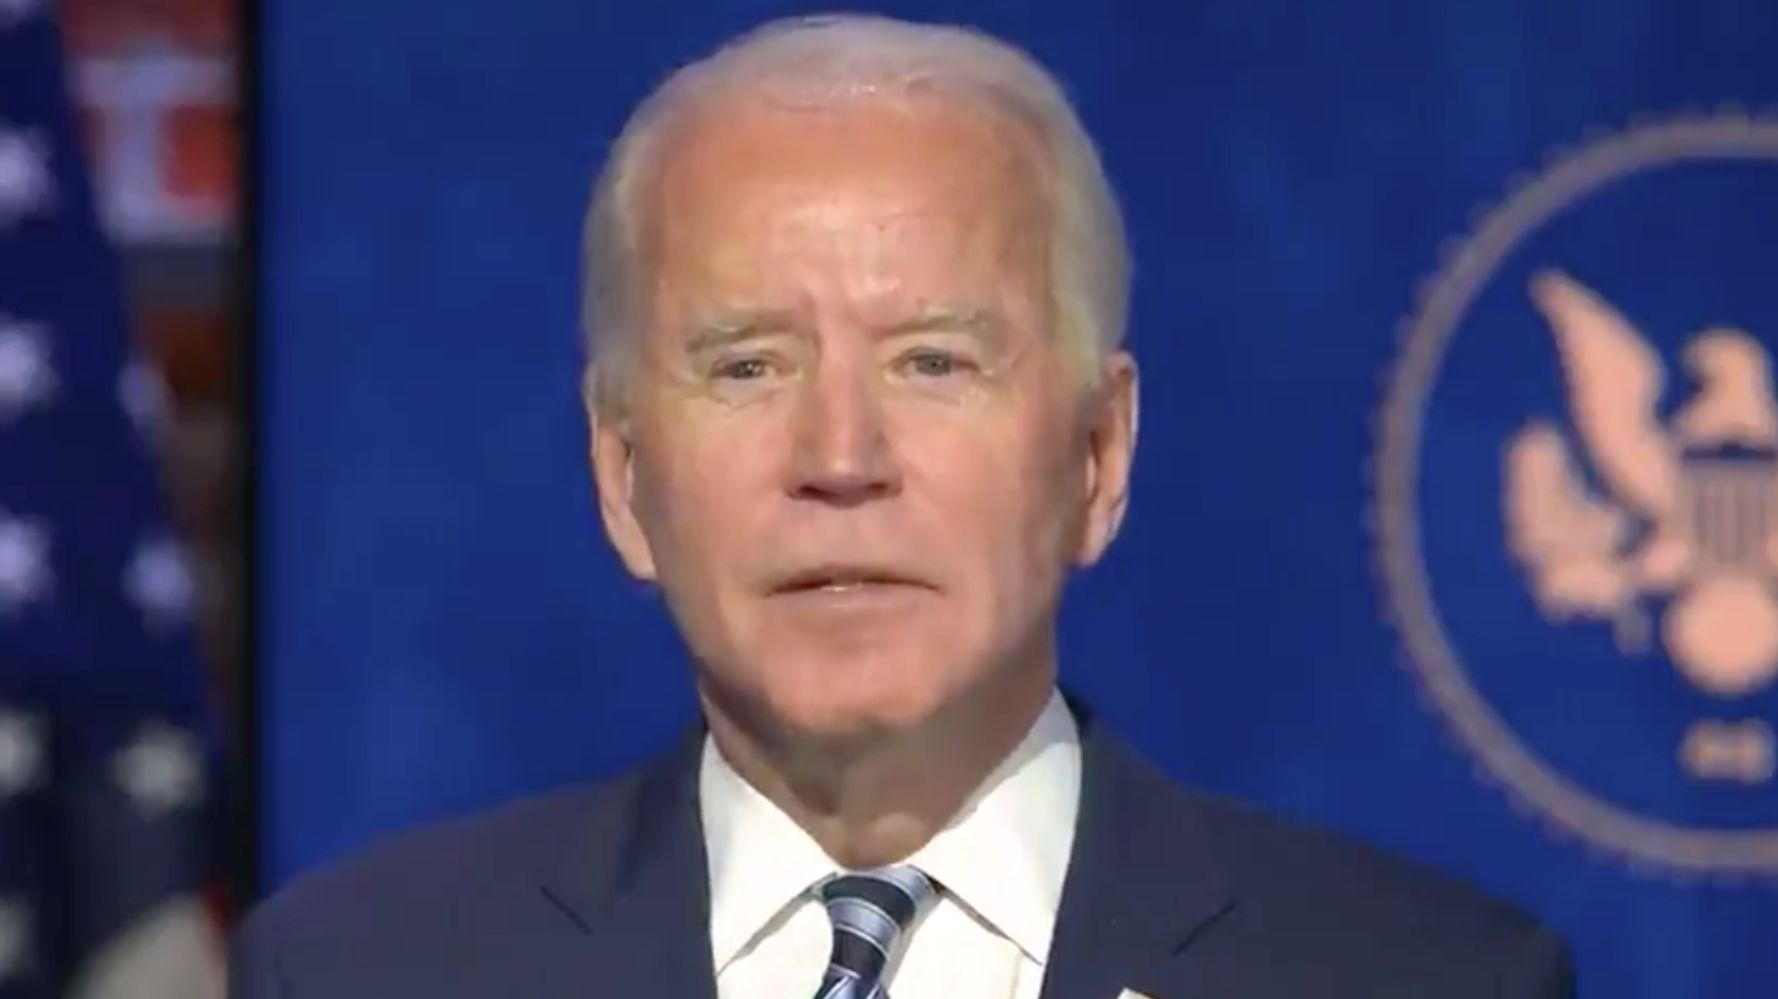 Biden Says He Hopes Trump Attends Inauguration To Show ‘Chaos’ Is Over